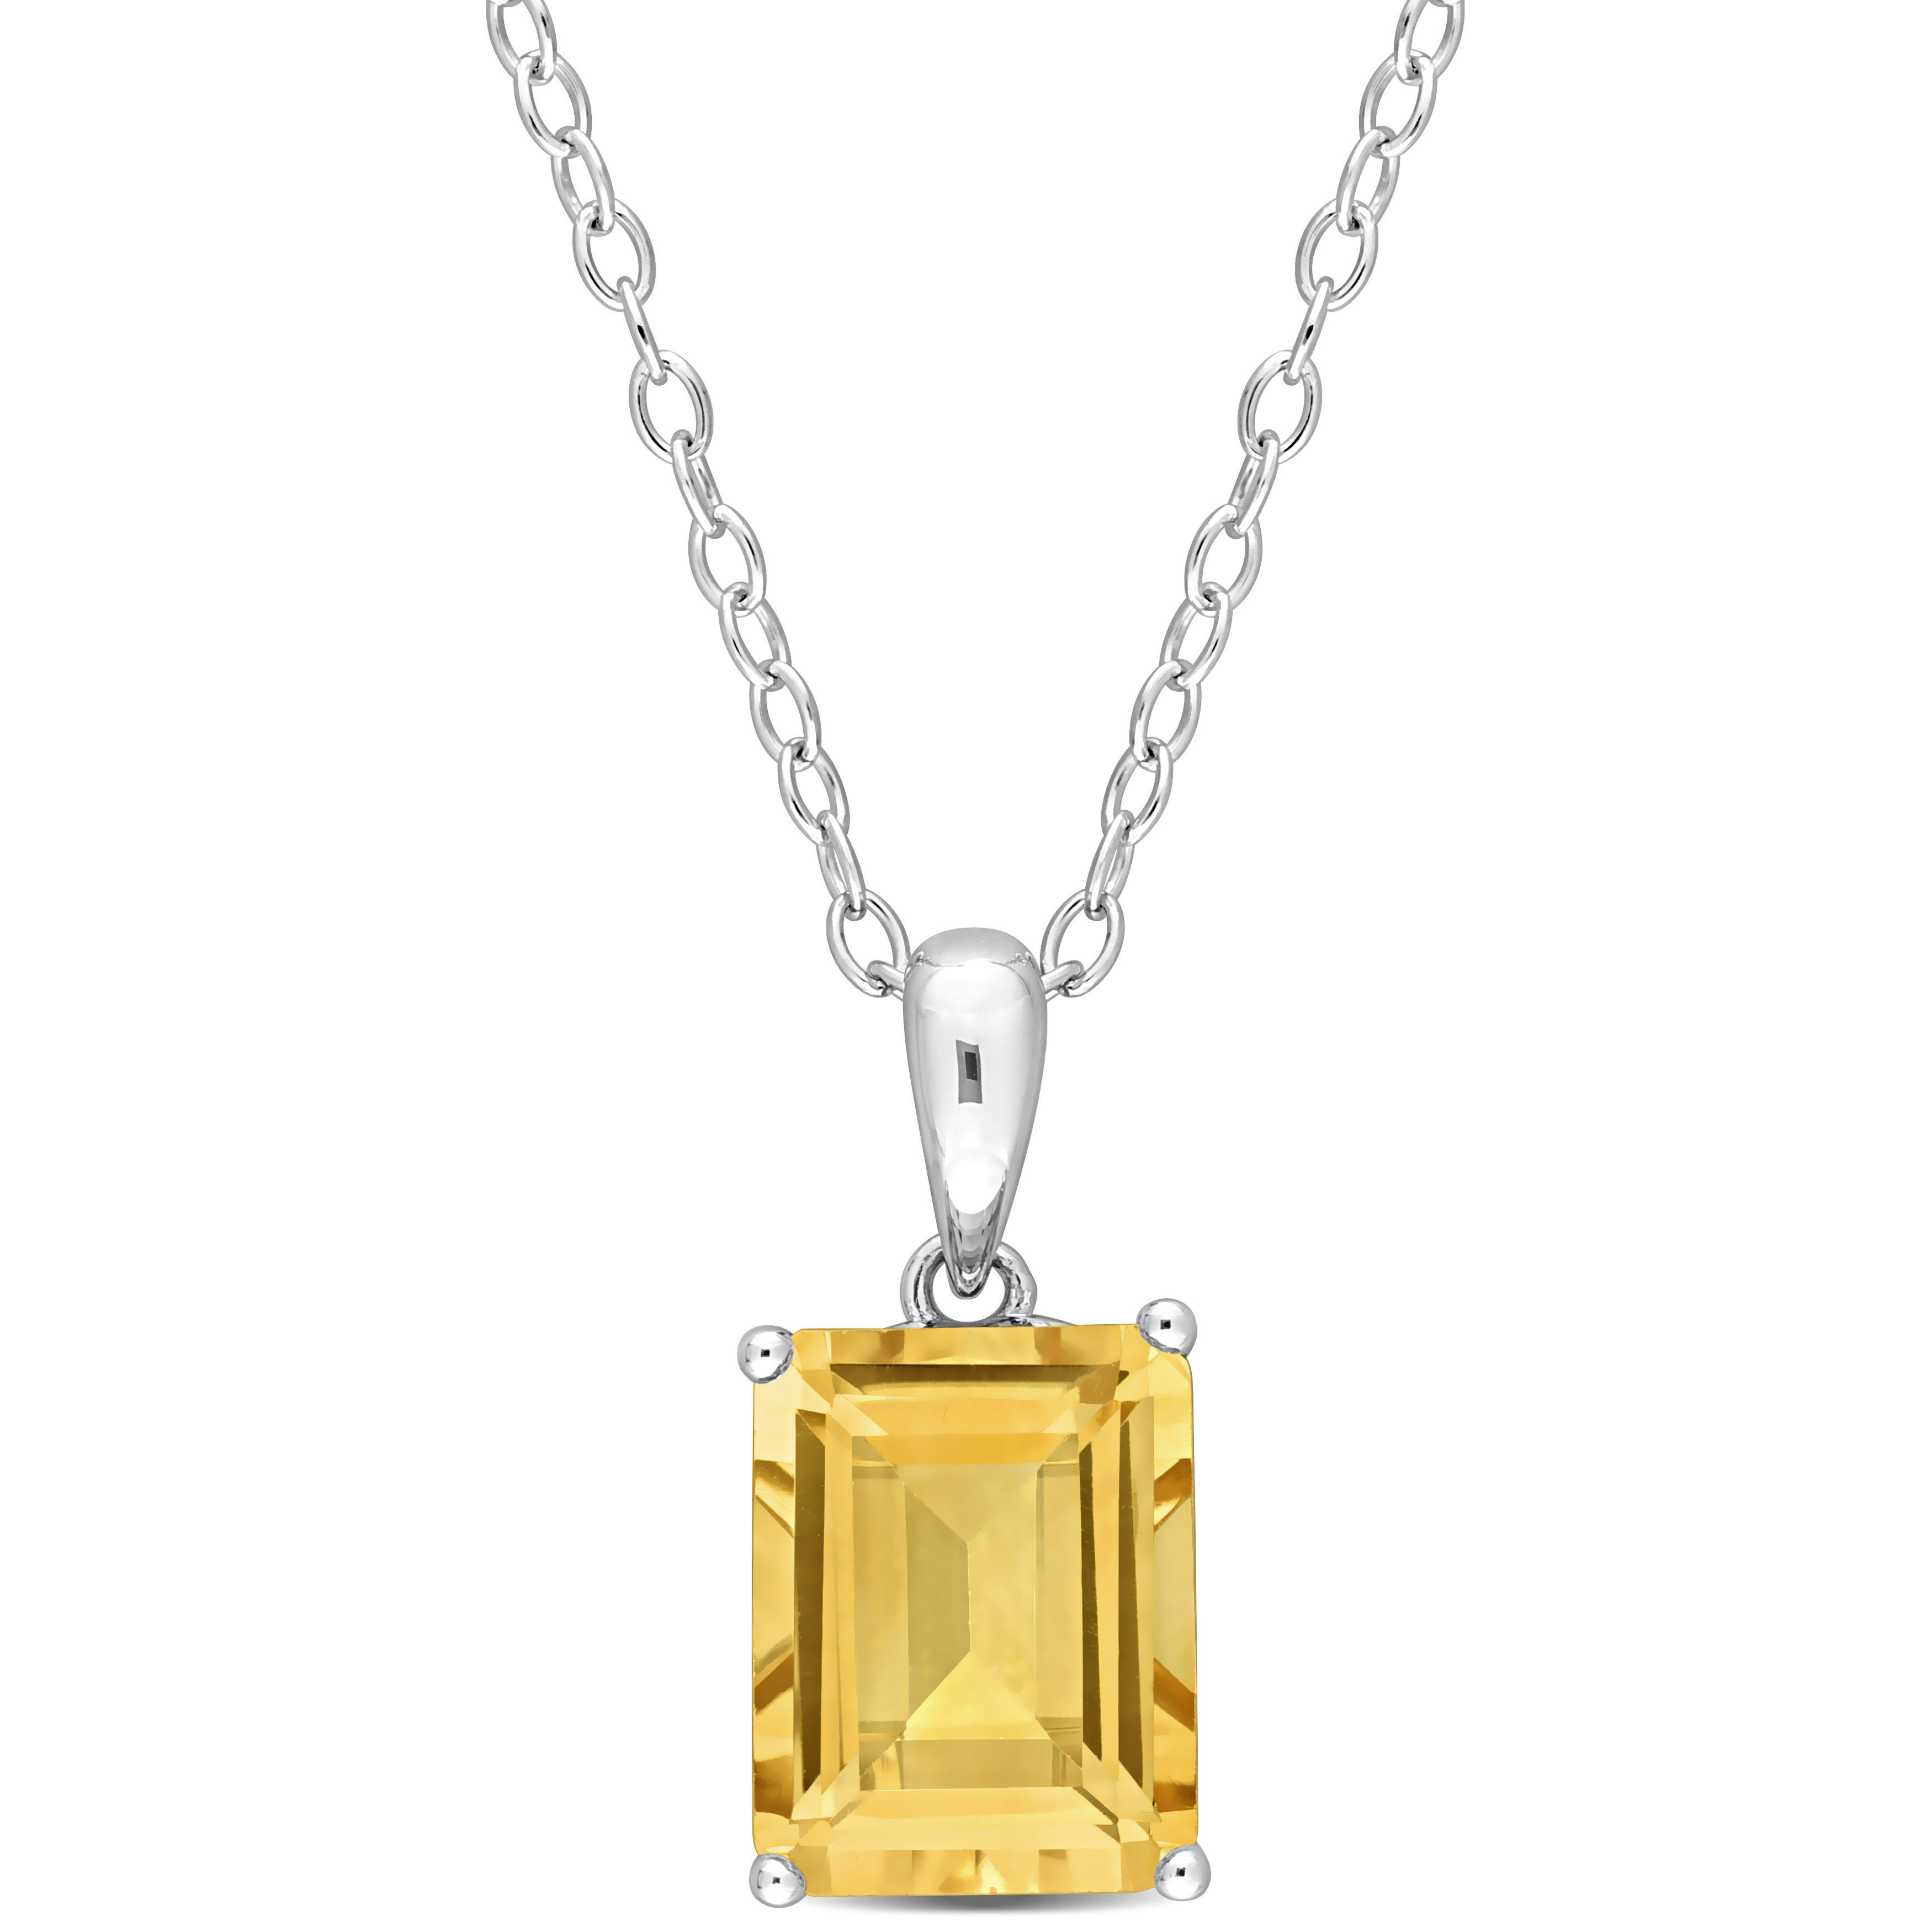 2 1/3 CT TGW Emerald Cut Citrine Solitaire Heart Design Pendant with Chain in Sterling Silver - 18 in.